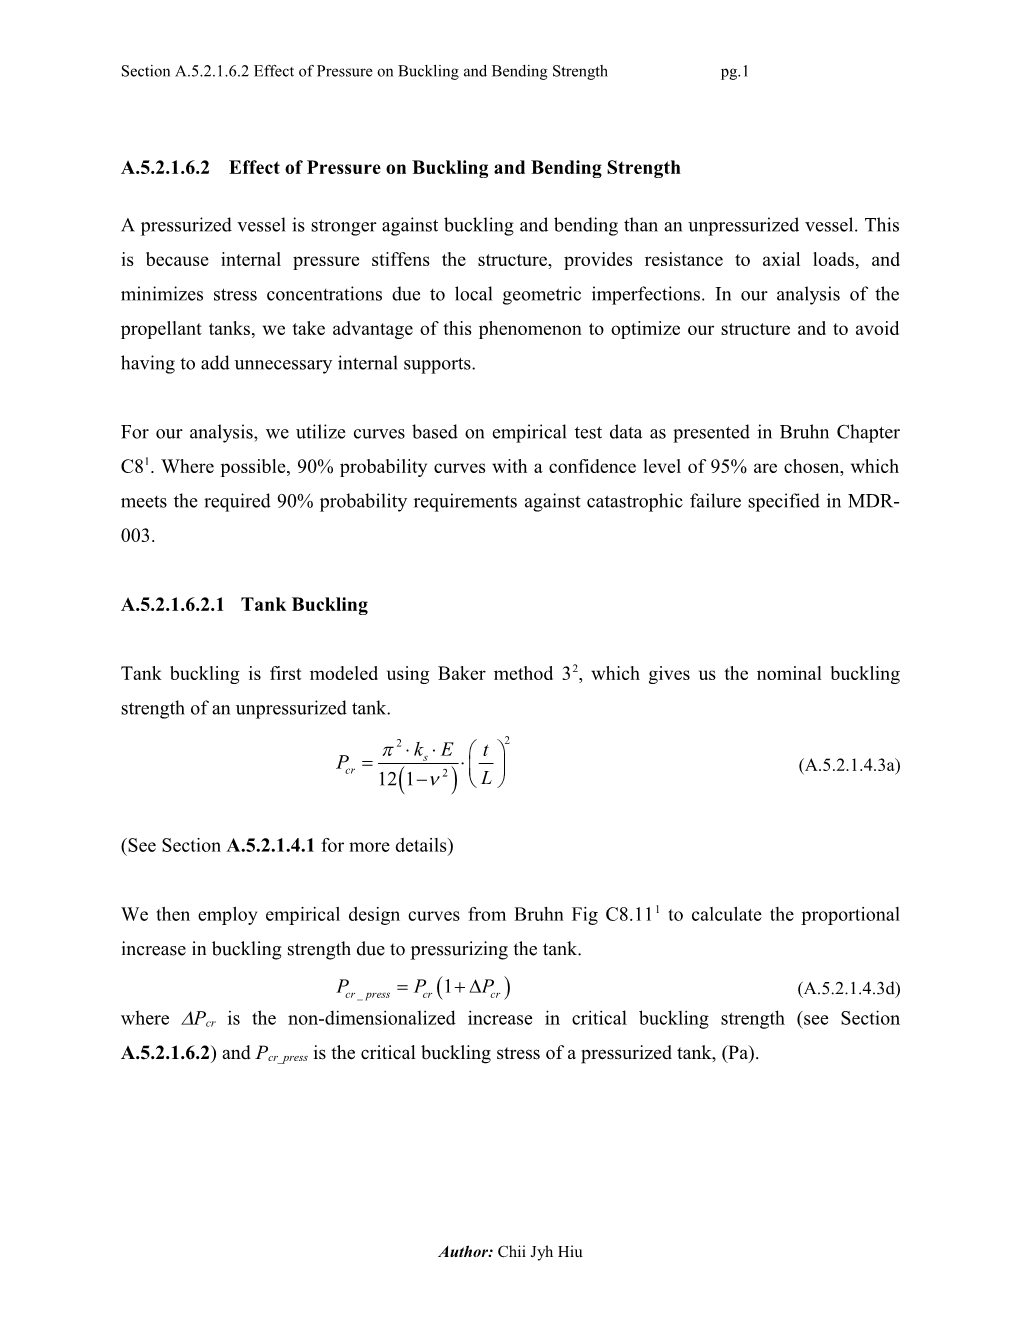 Section A.5.2.1.6.2 Effect of Pressure on Buckling and Bending Strength Pg.1